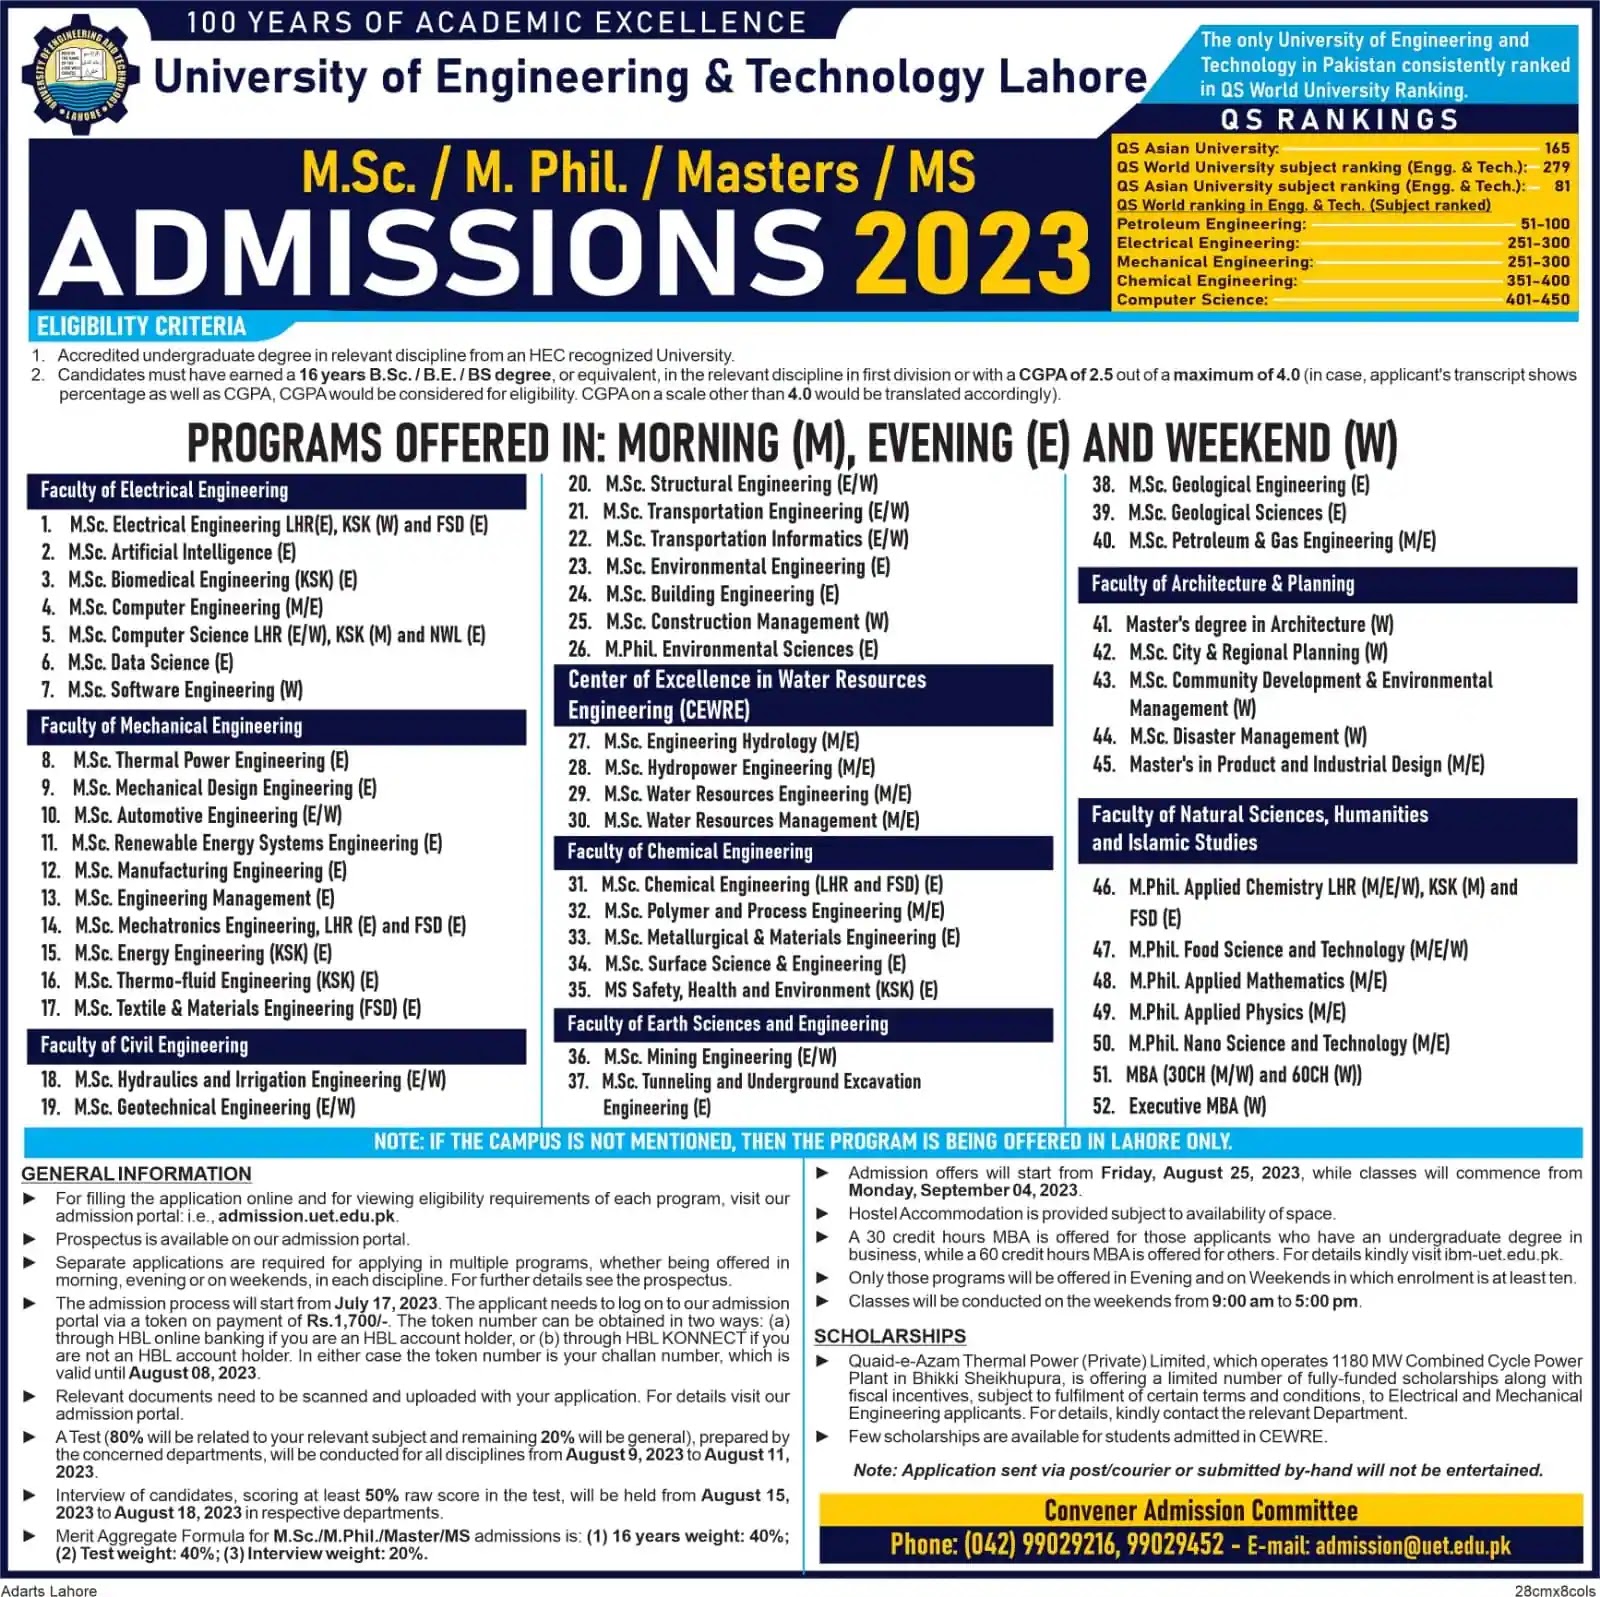 The University of Engineering and Technology is only in Pakistani University that is consistently ranked in QS World University Ranking year 2023.